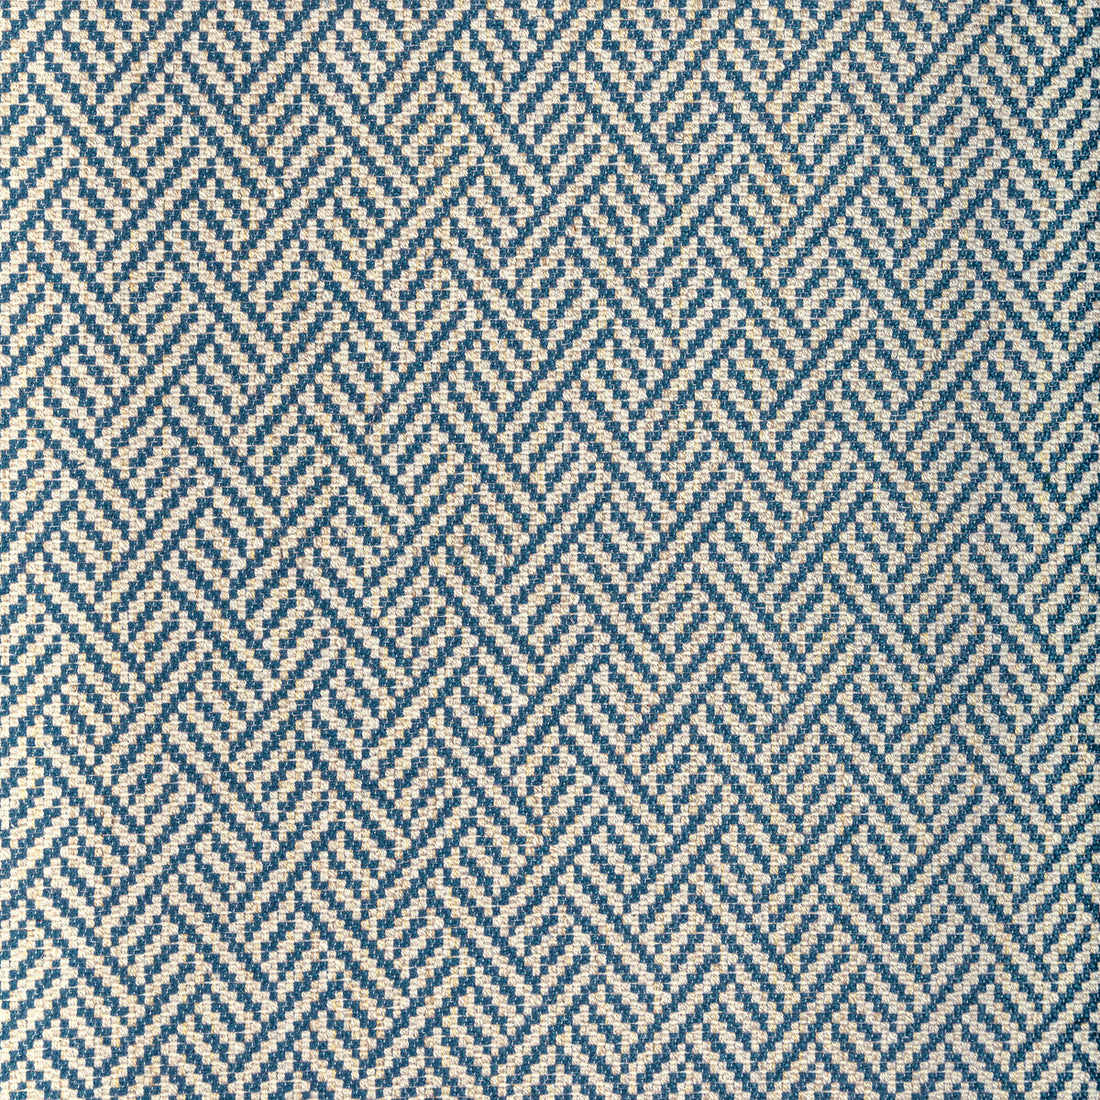 Colbert Weave fabric in blue color - pattern 8022108.5.0 - by Brunschwig &amp; Fils in the Lorient Weaves collection